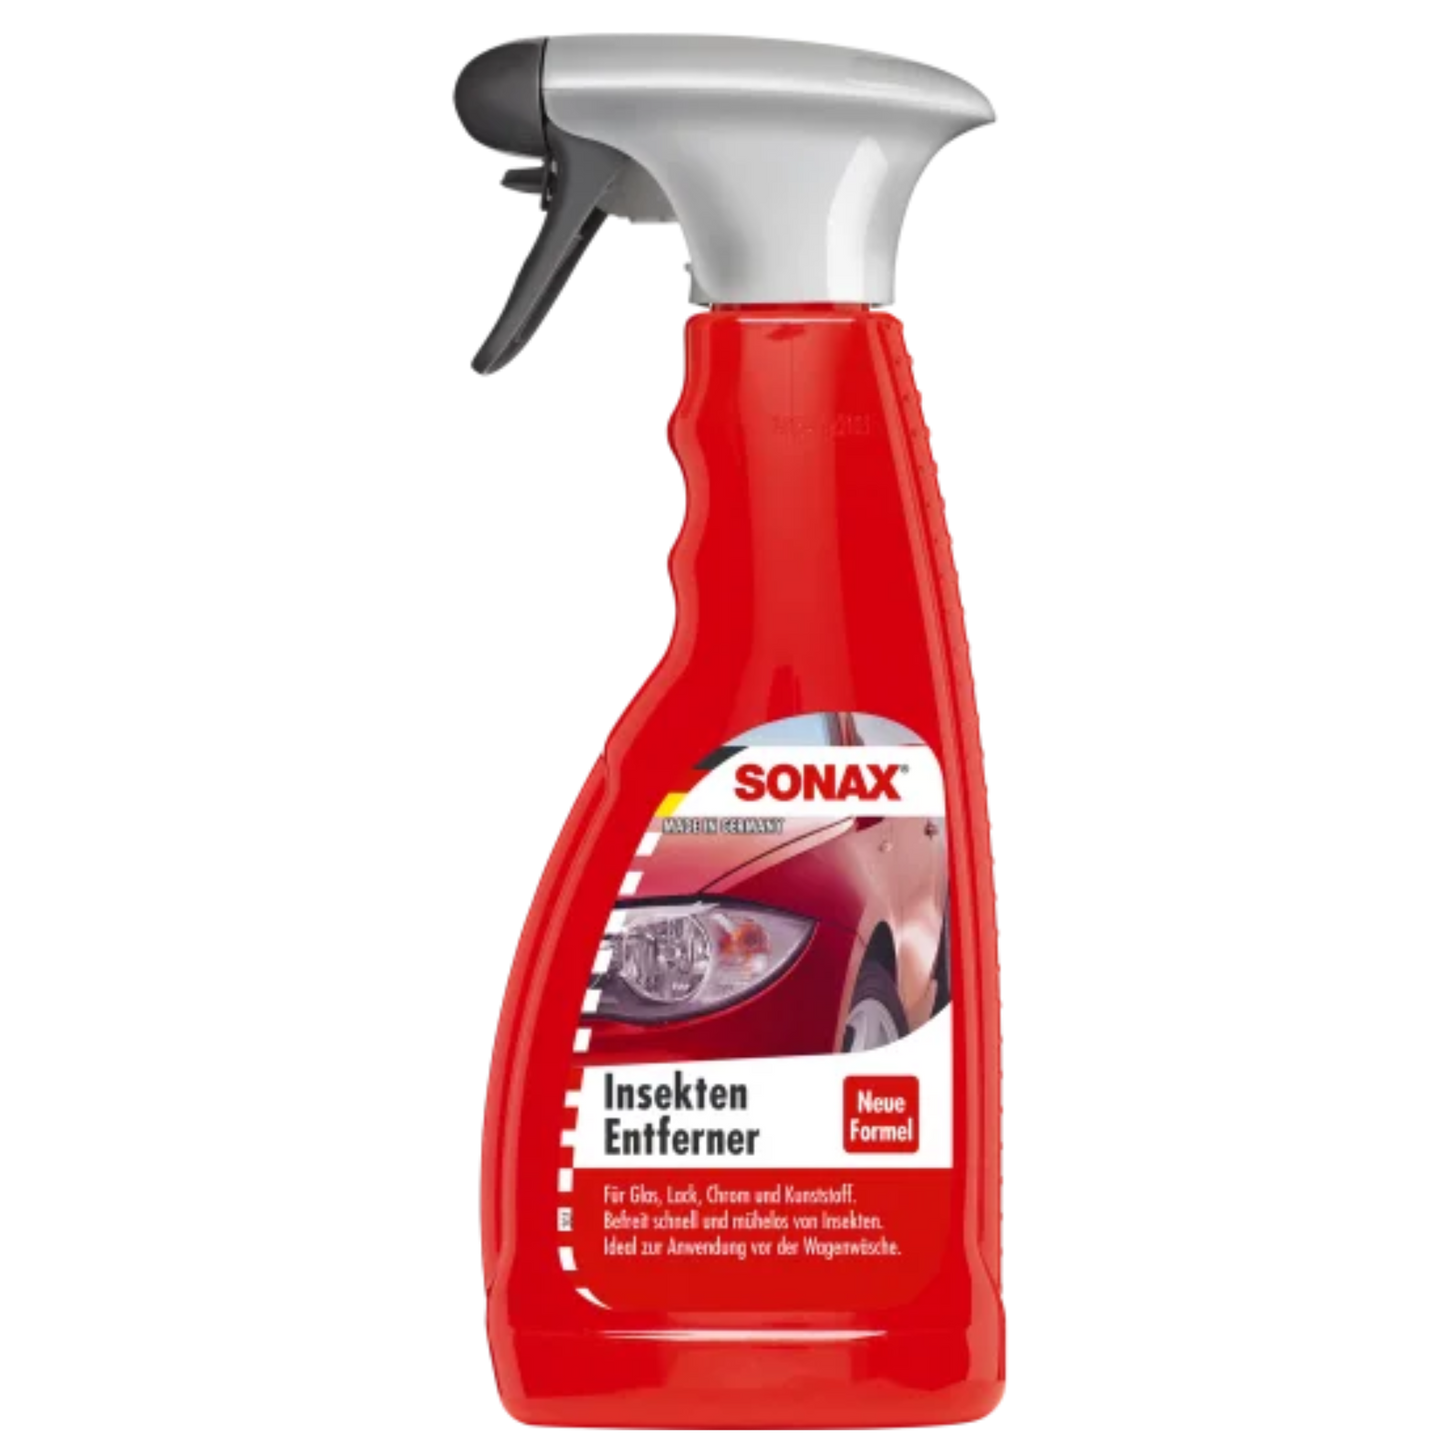 SONAX insect remover, 500ml